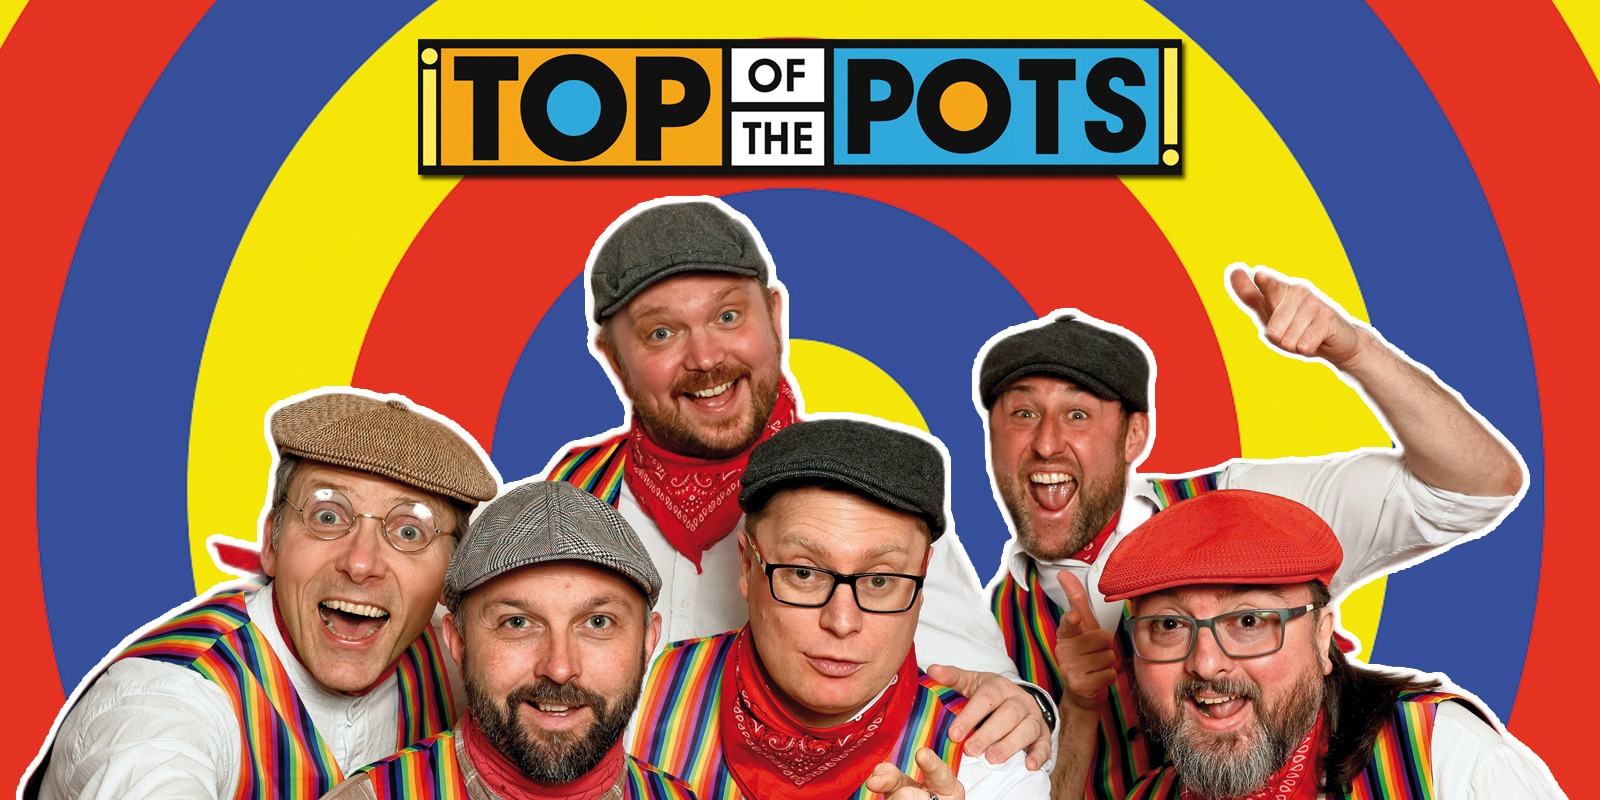 A promotional image of the Lancashire Hotpots for their 2023 Top of the Pots tour dates